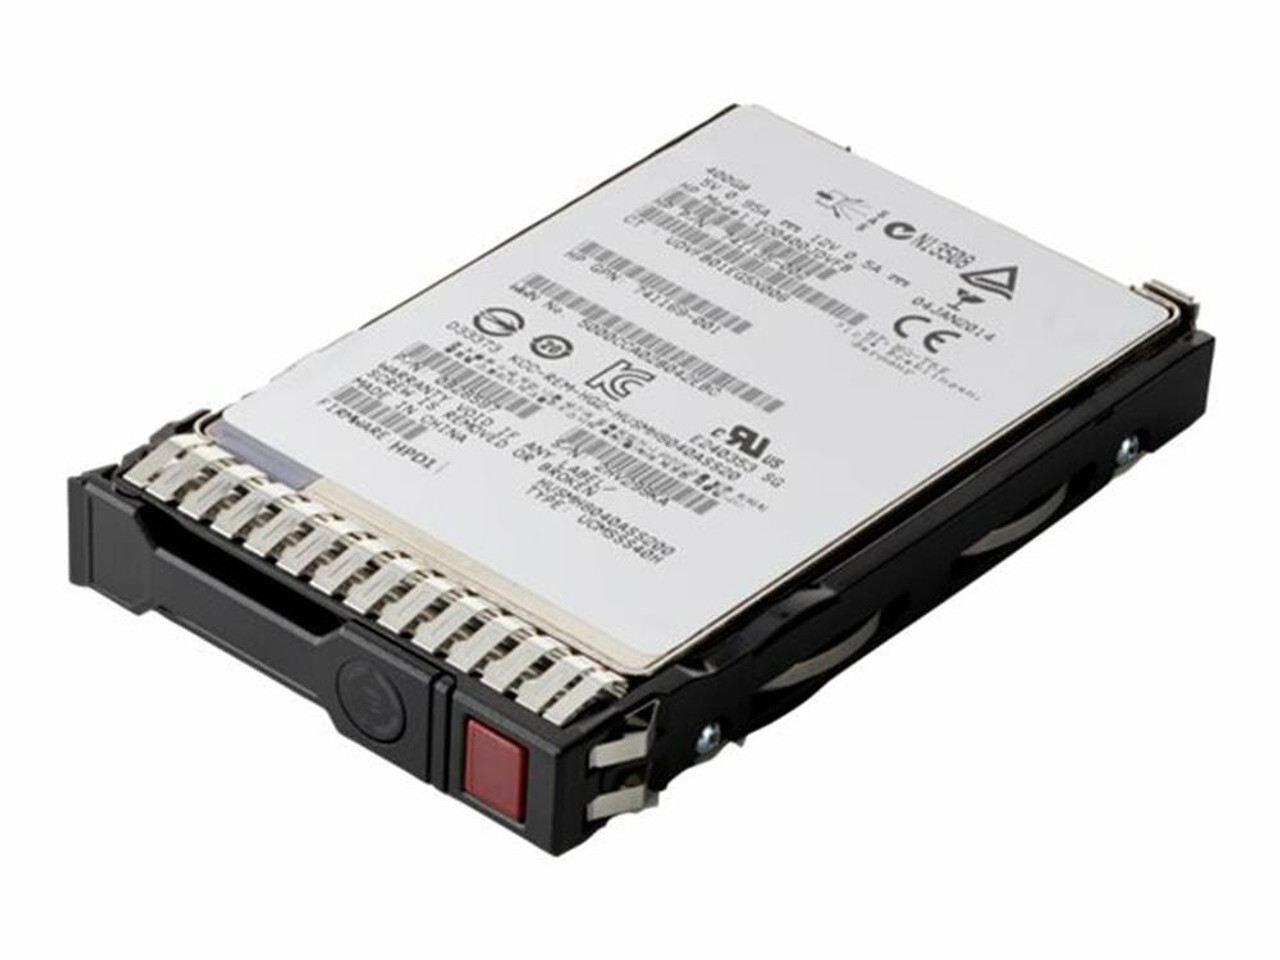 P10444-H21 HPE 3.84TB SAS 12Gbps Read Intensive 2.5-inch Internal Solid State Drive (SSD) with Smart Carrier